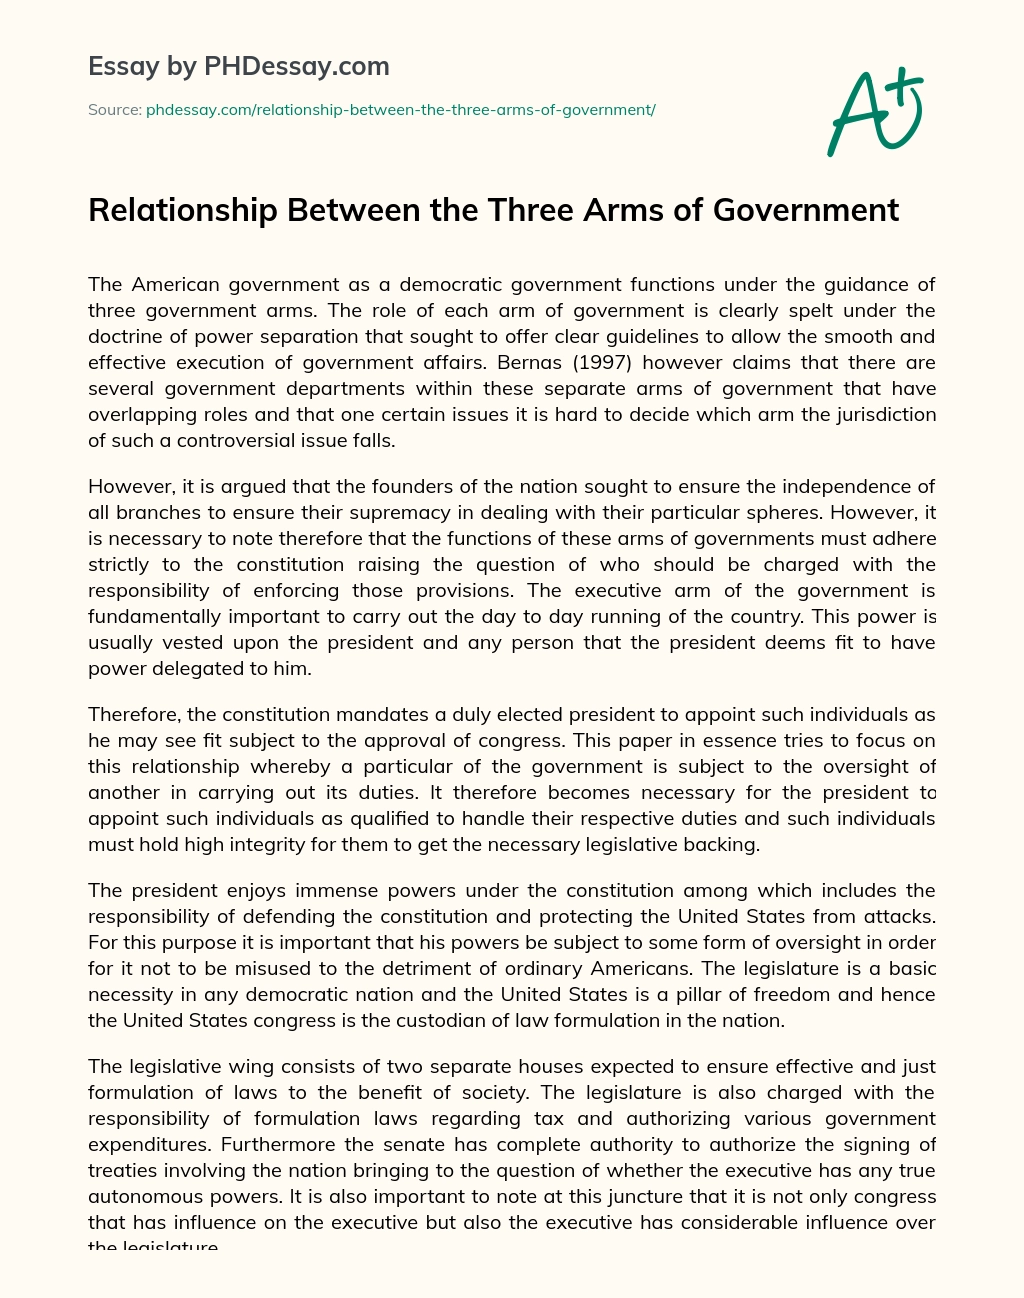 Relationship Between the Three Arms of Government essay